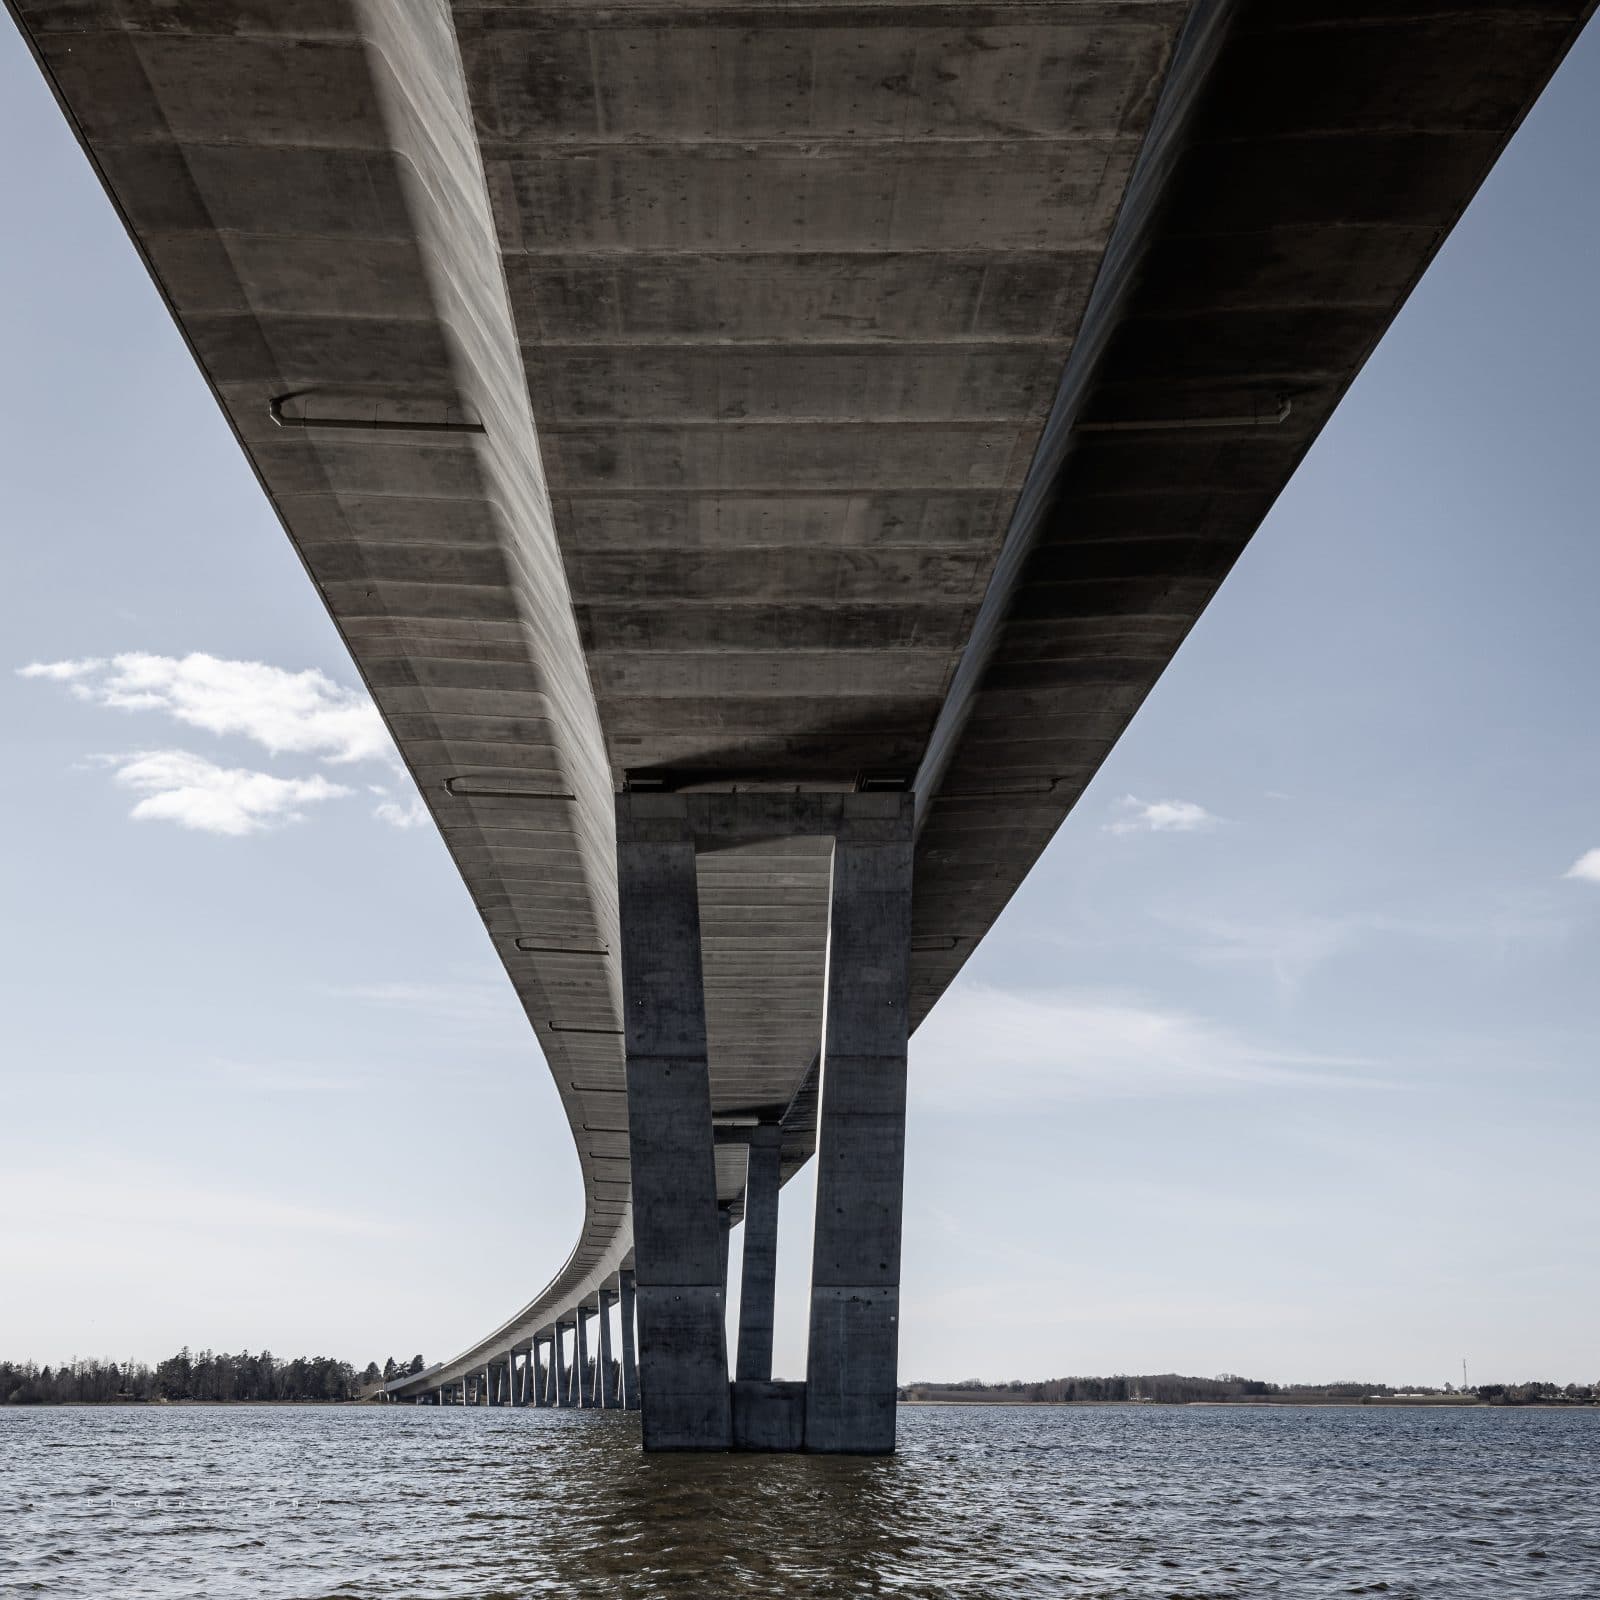 Crown Princess Mary's Bridge crosses Roskilde Fjord and connects Frederikssund and Hornsherred.